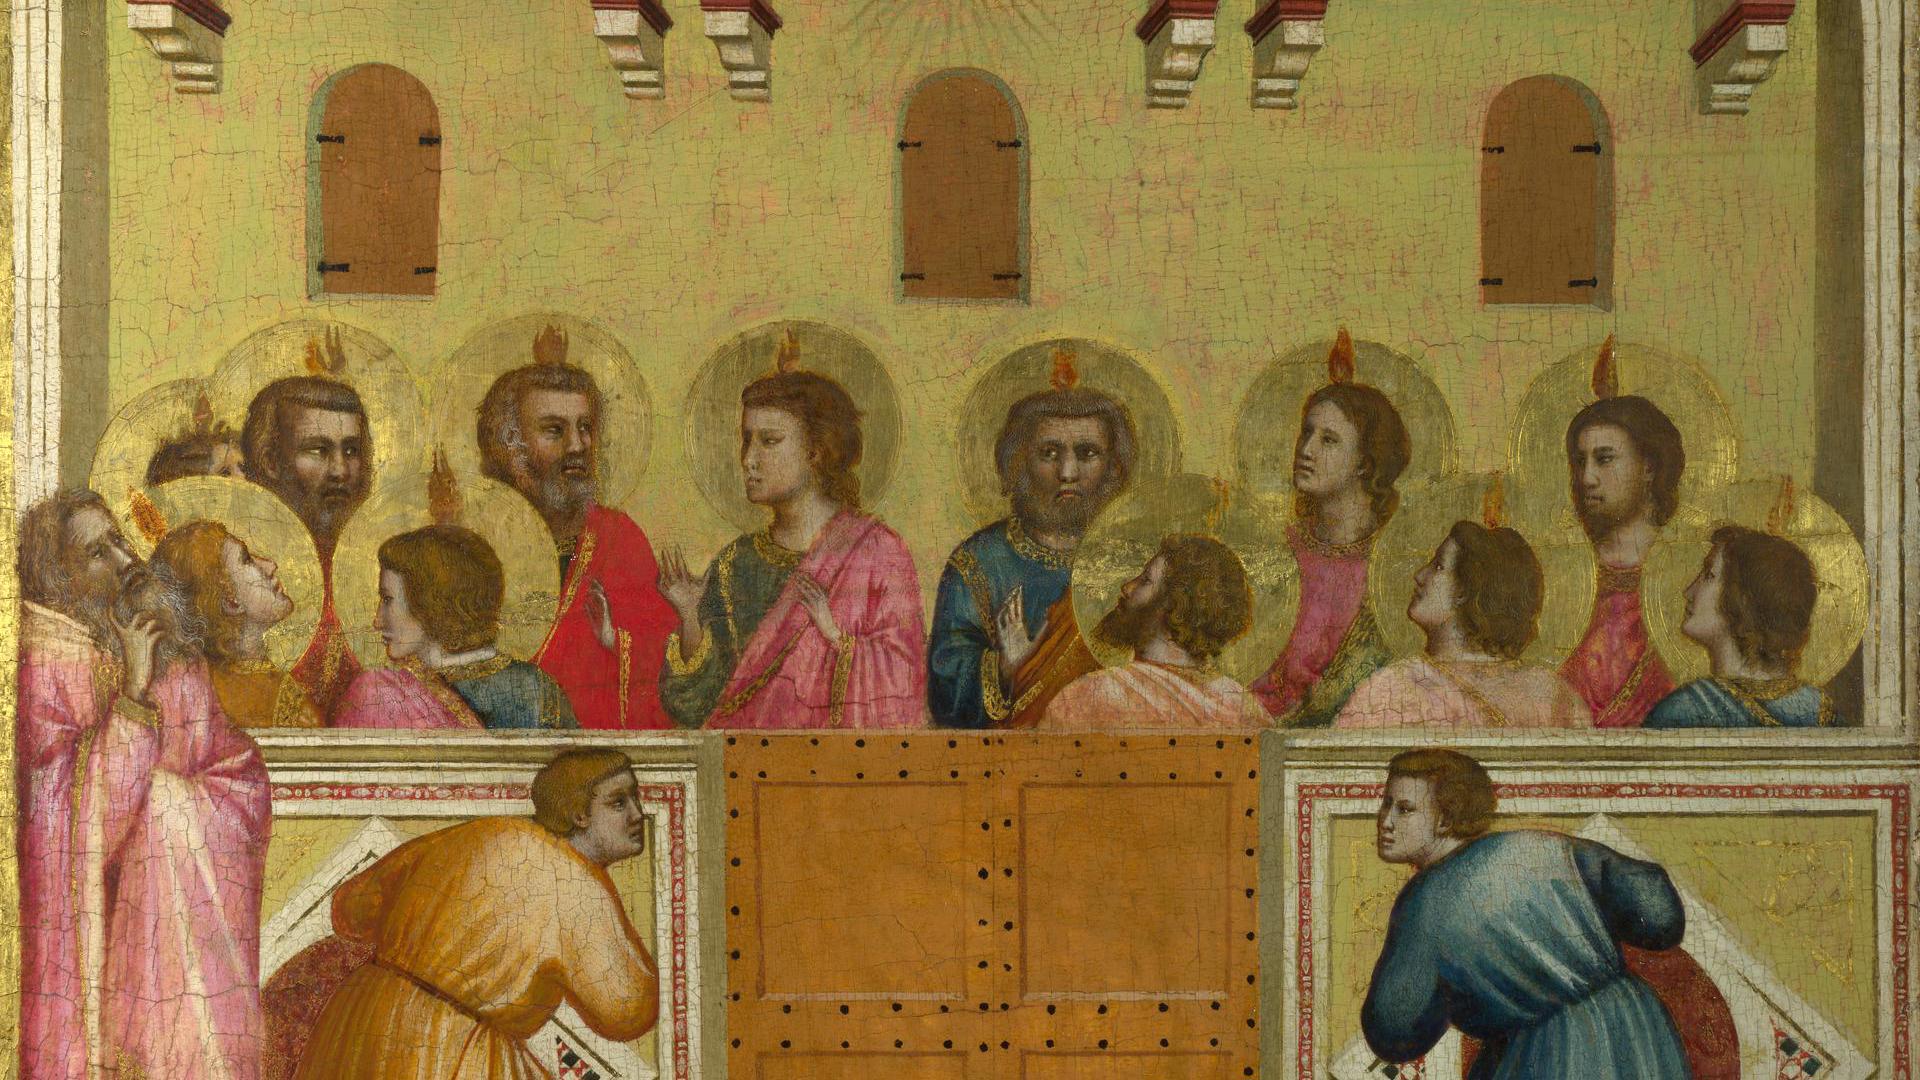 Pentecost by Giotto and Workshop